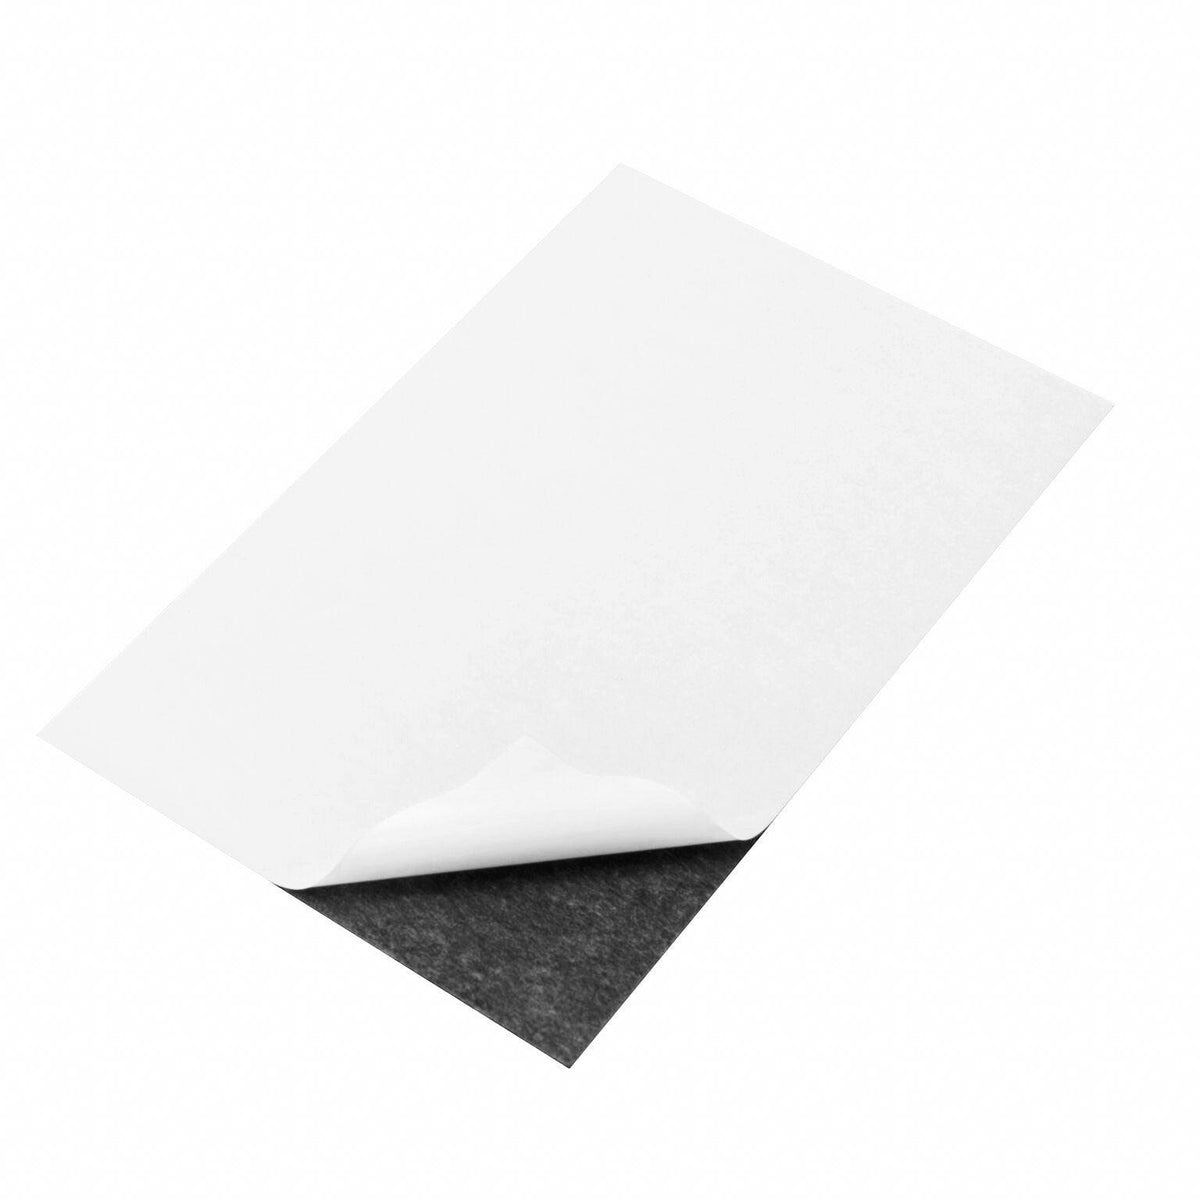 1 x 1 Inch Strong Flexible Self-Adhesive Magnetic Squares, Peel